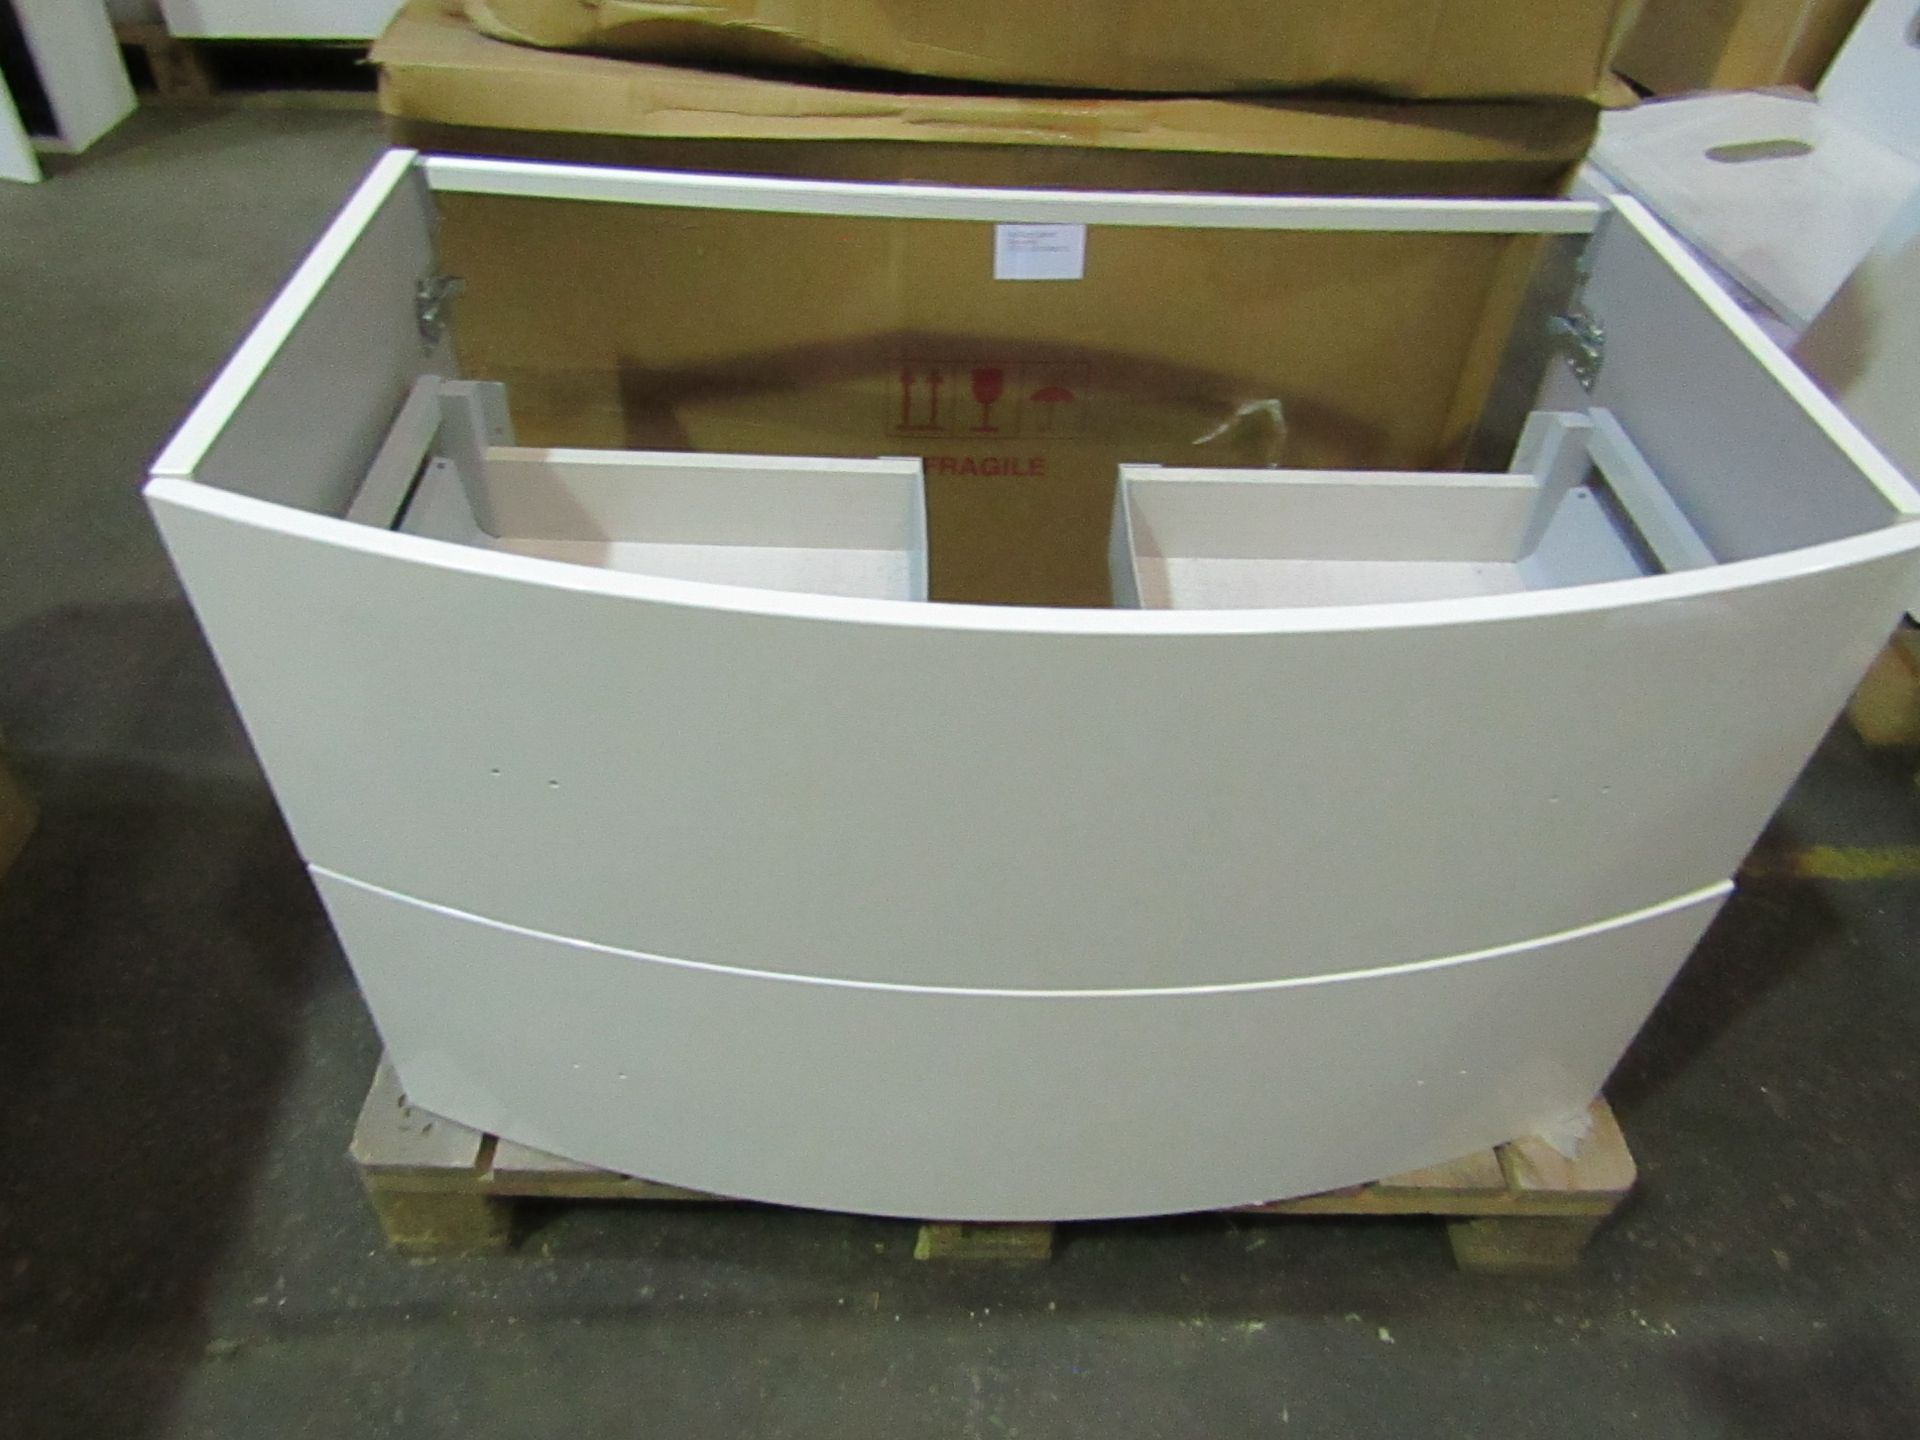 Vue - Gloss White 90cm Curved Vanity Cabinet - Item Looks In Good Condition, May Need Screws